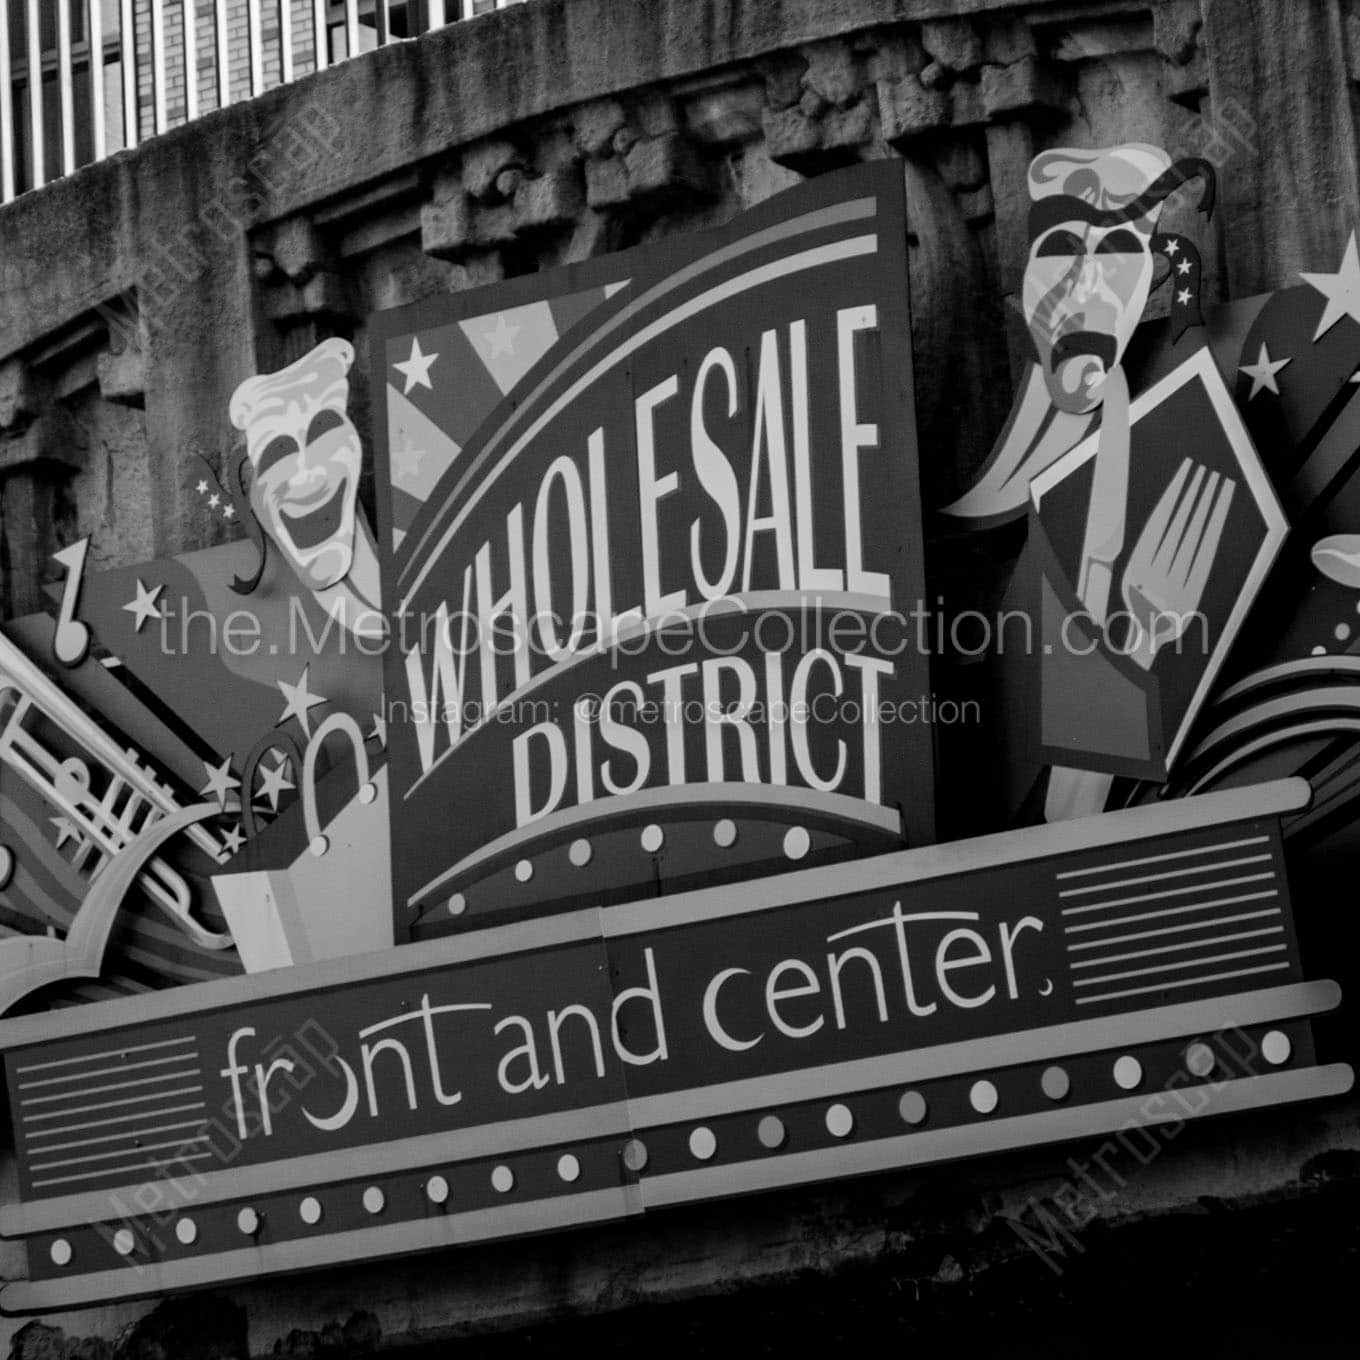 wholesale district sign Black & White Wall Art